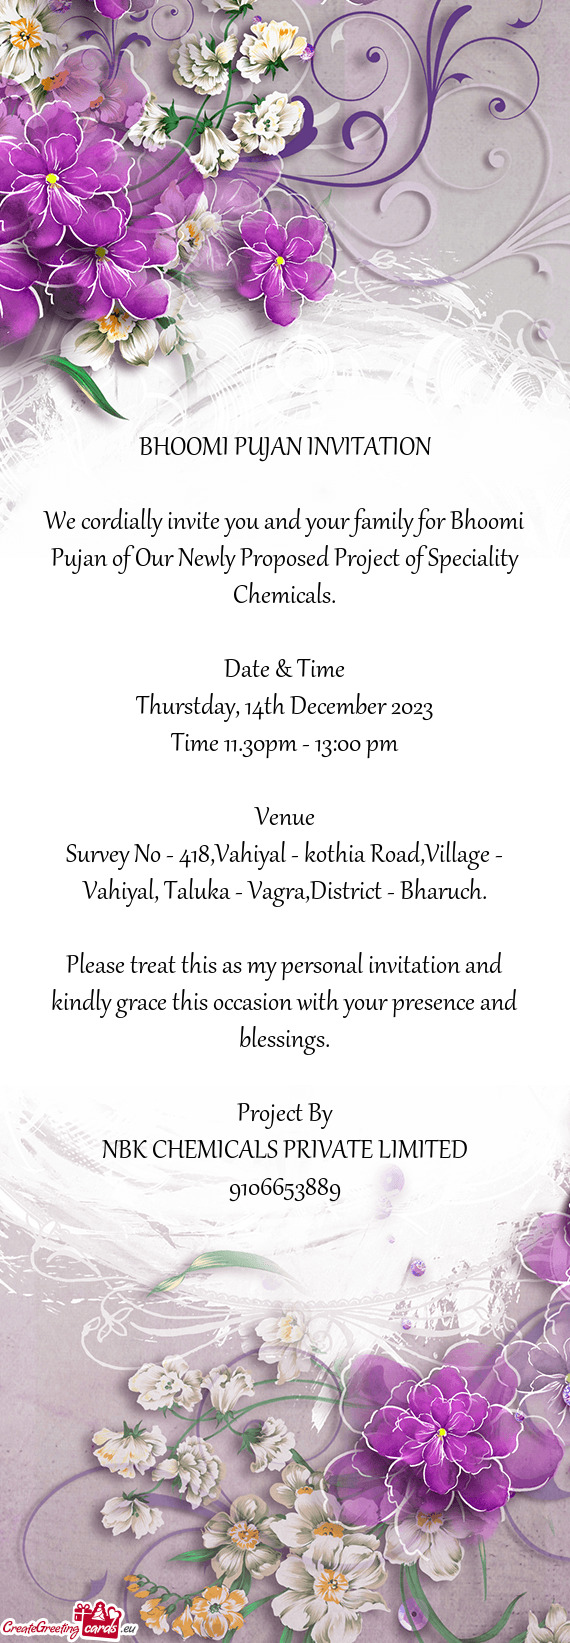 We cordially invite you and your family for Bhoomi Pujan of Our Newly Proposed Project of Speciality